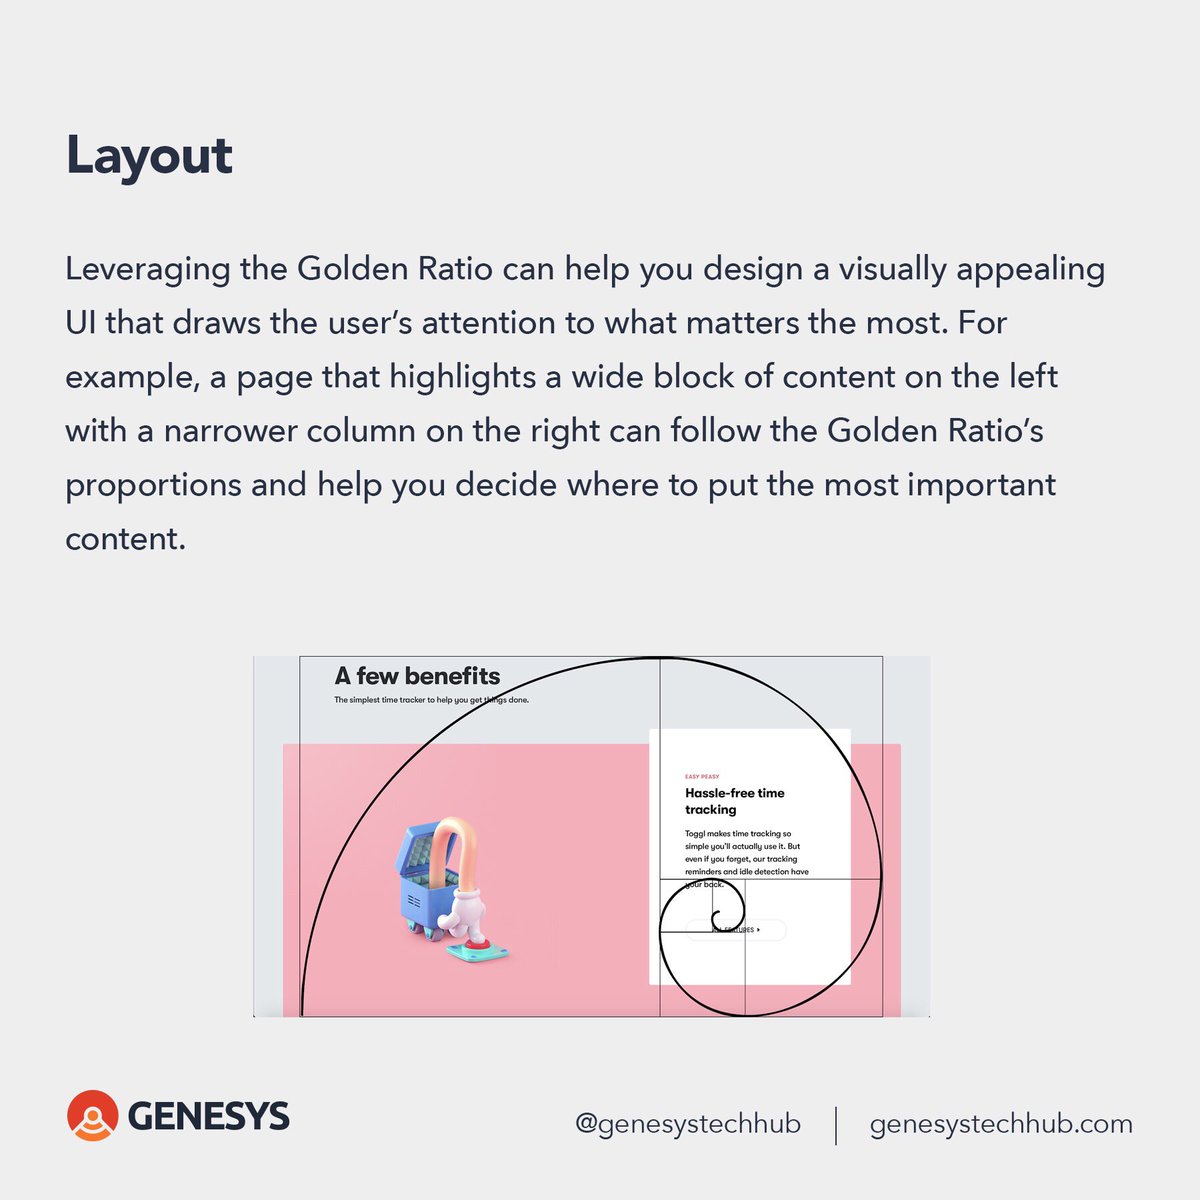 Now you know all there is about Golden Ratios. How do we use Golden Ratio in design? #weAreGenesys  #GoldenRatio  #DesignWithMong  #designthinking